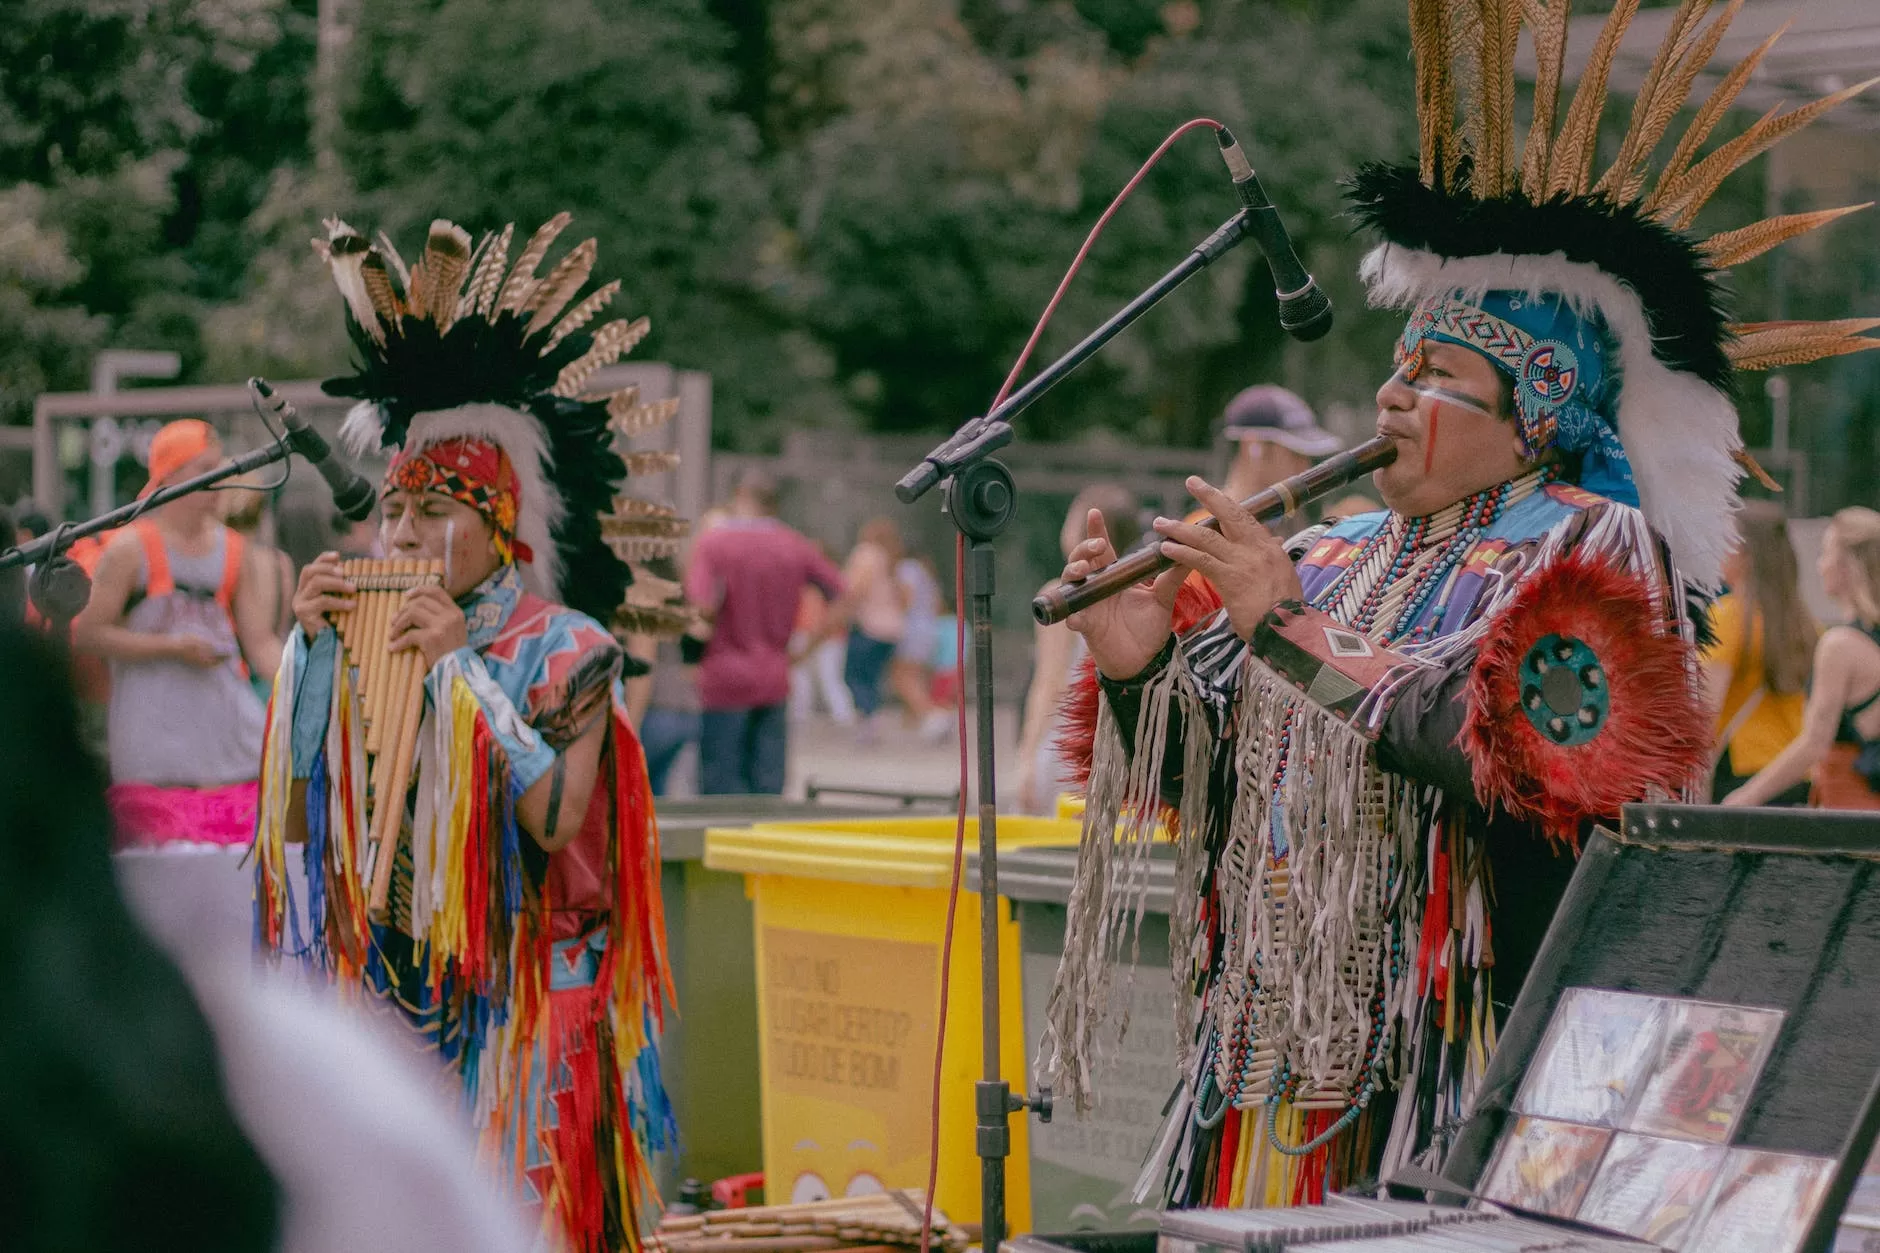 Travel to North America to see native americans playing woodwind instruments